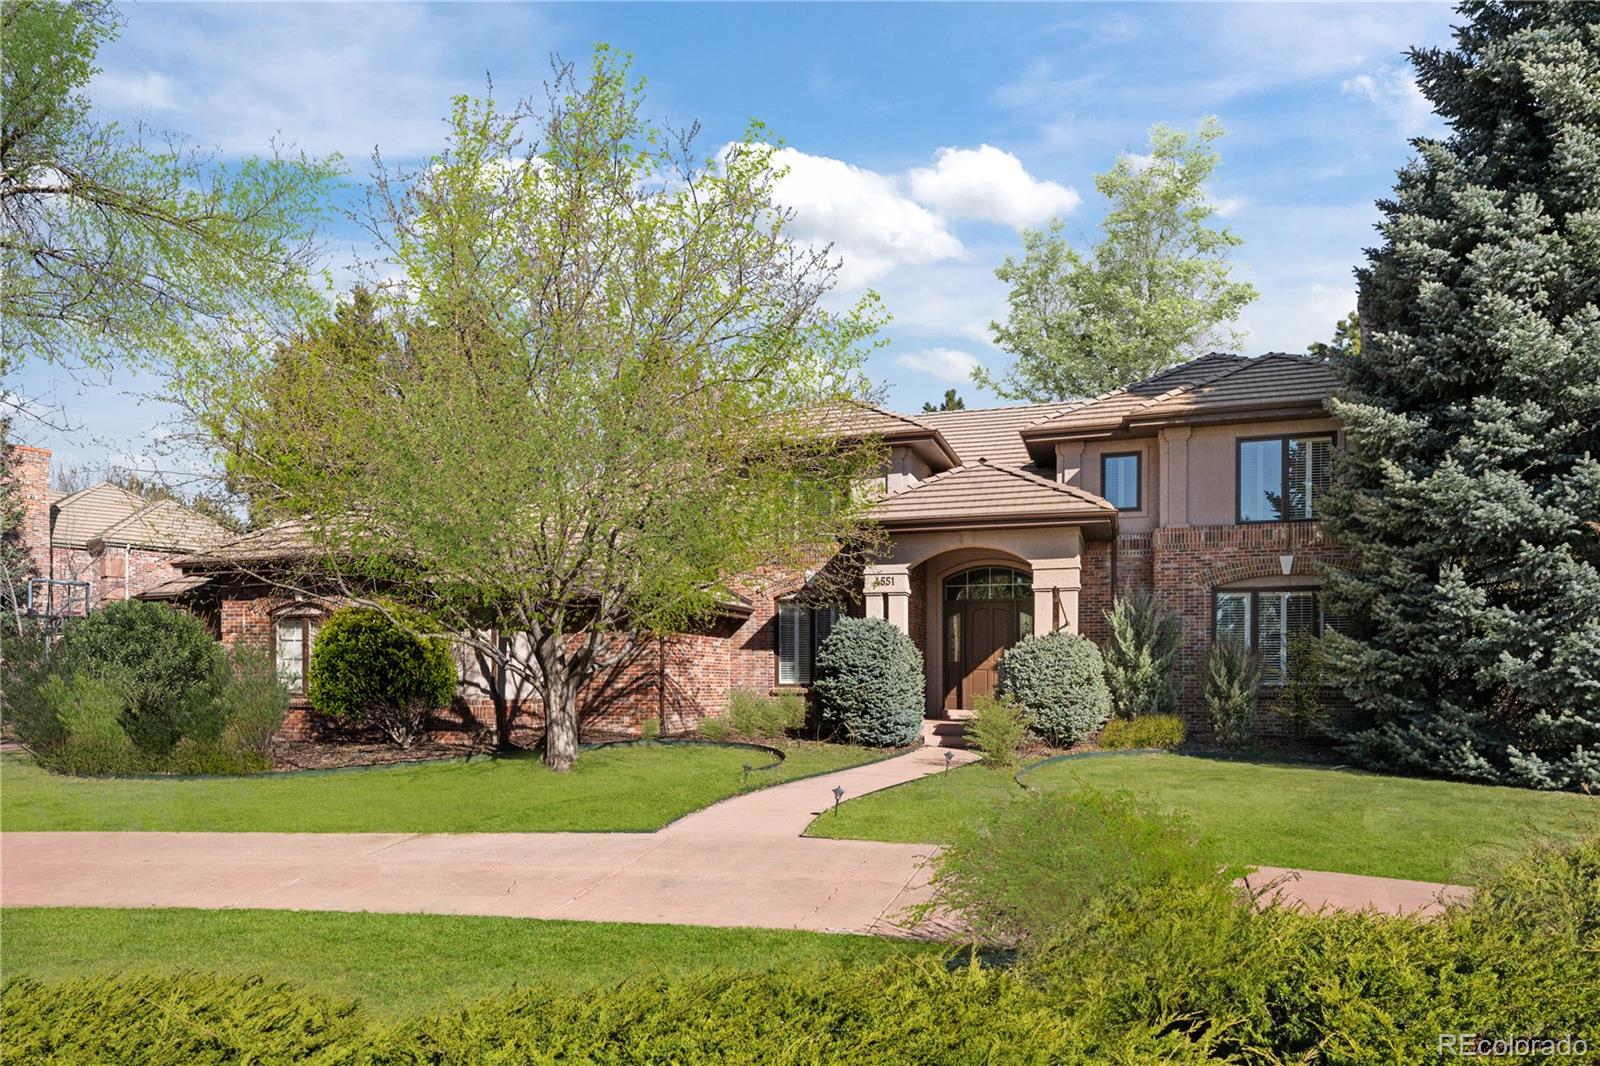 4551 E Perry Parkway, greenwood village MLS: 3619450 Beds: 5 Baths: 6 Price: $3,300,000